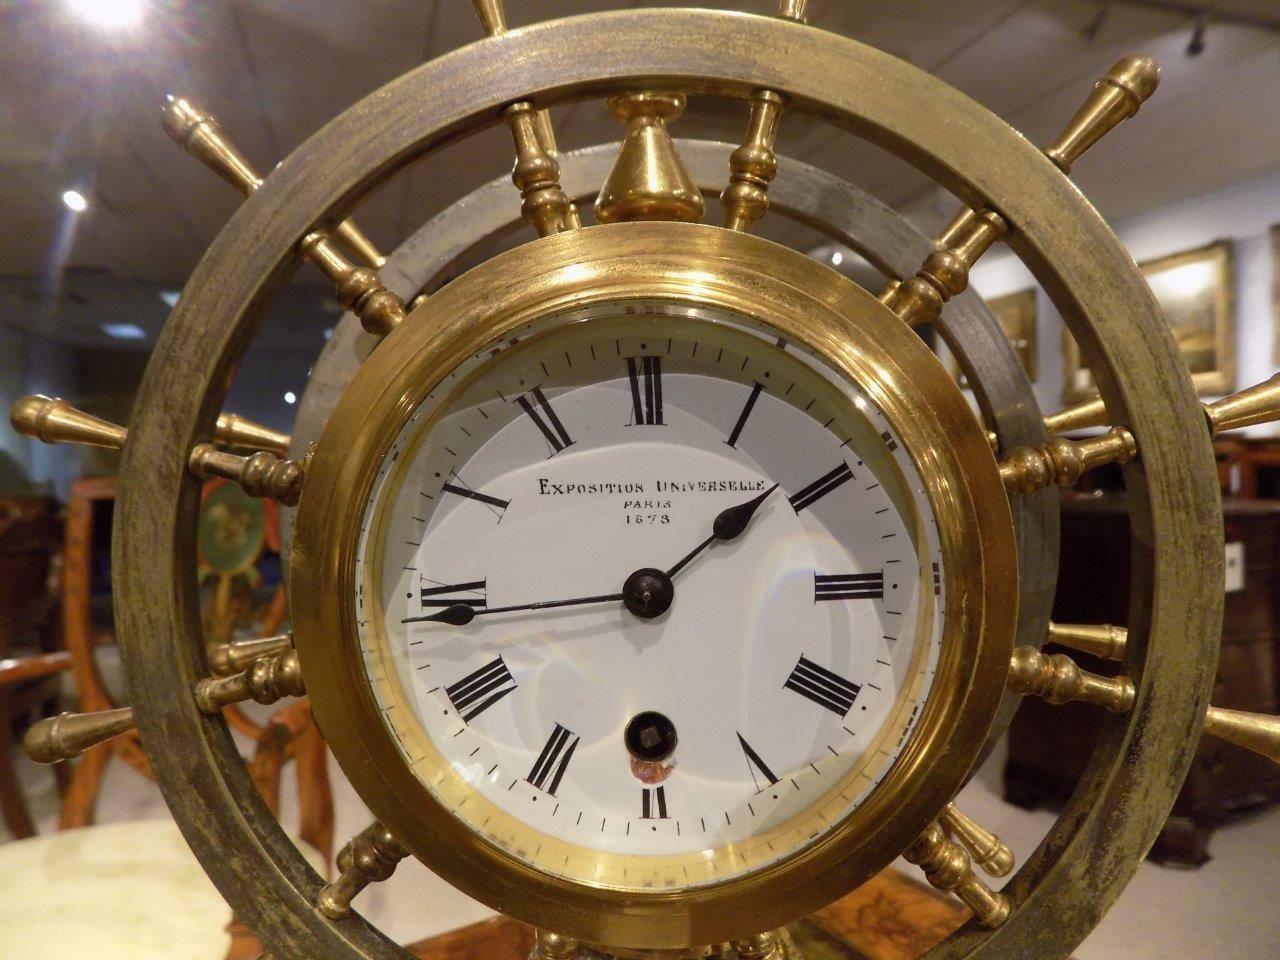 A rare novelty nautical revolving ships wheel desk clock or barometer. Each side is modelled as a steel and brass ships wheel with one side has an aneroid barometer and the opposite side has a clock. Each with enamelled dials and titled 